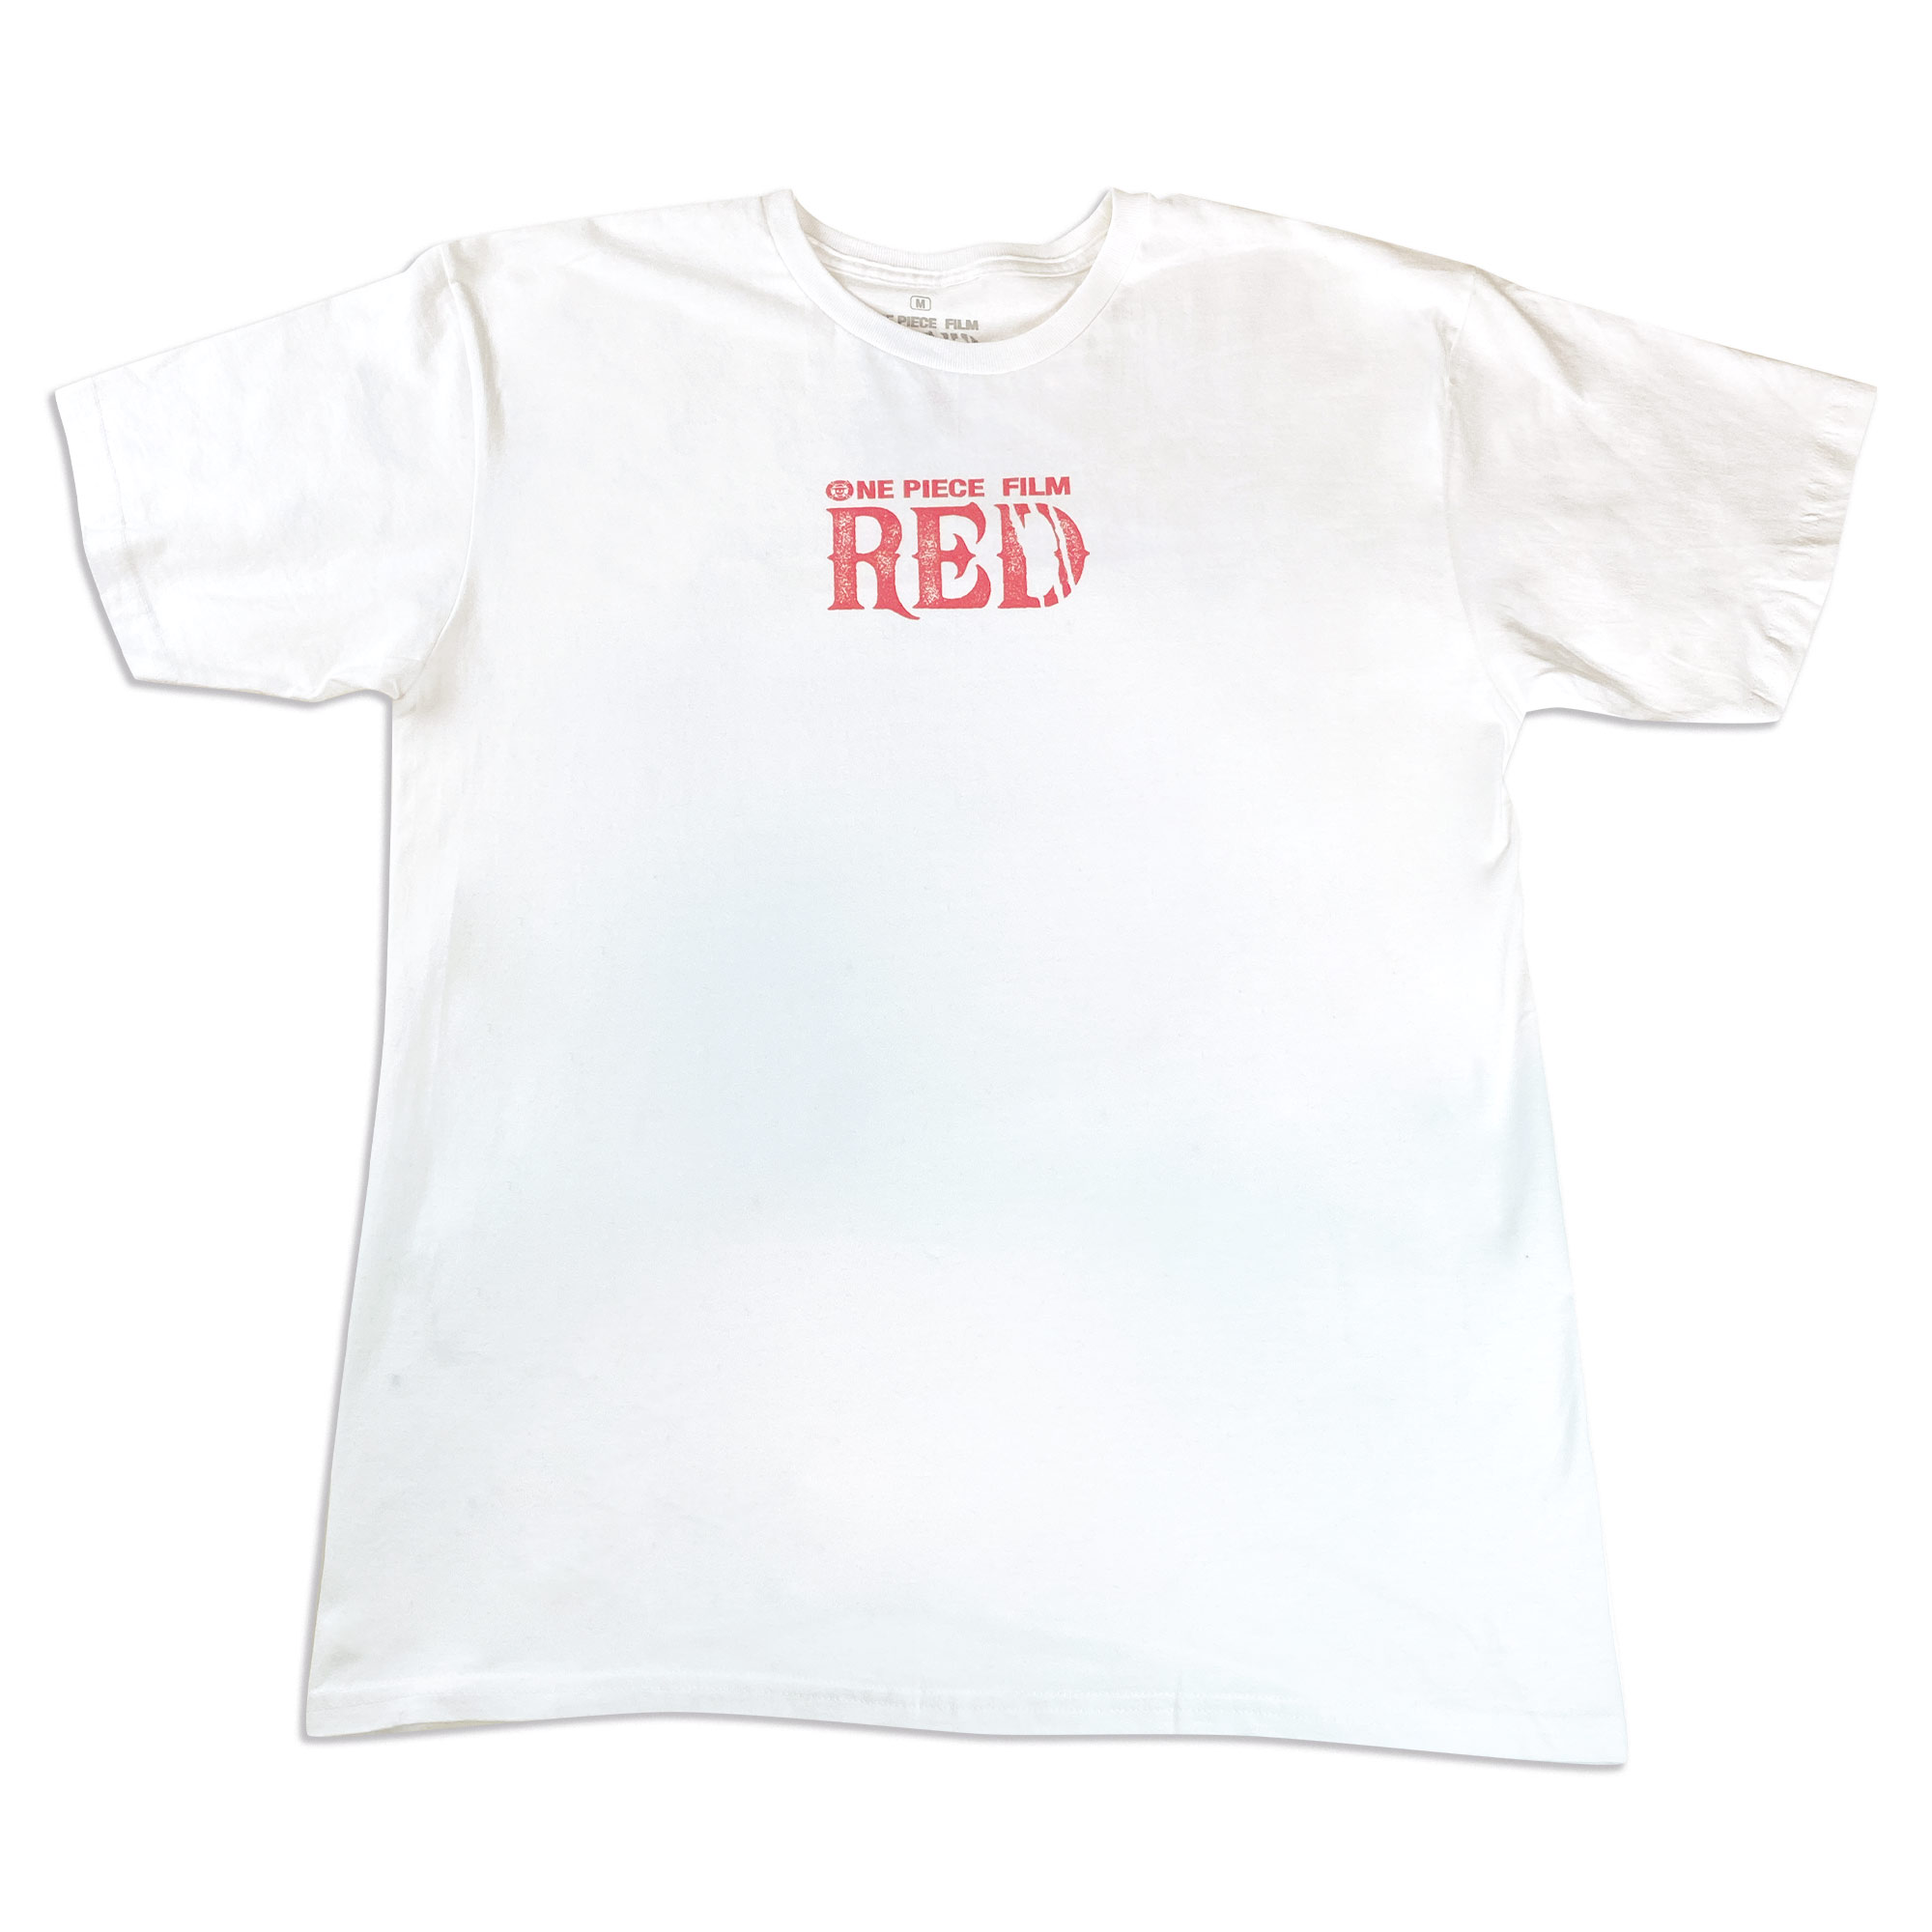 One Piece Film: Red - Uta T-Shirt  - Crunchyroll Exclusive! image count 1